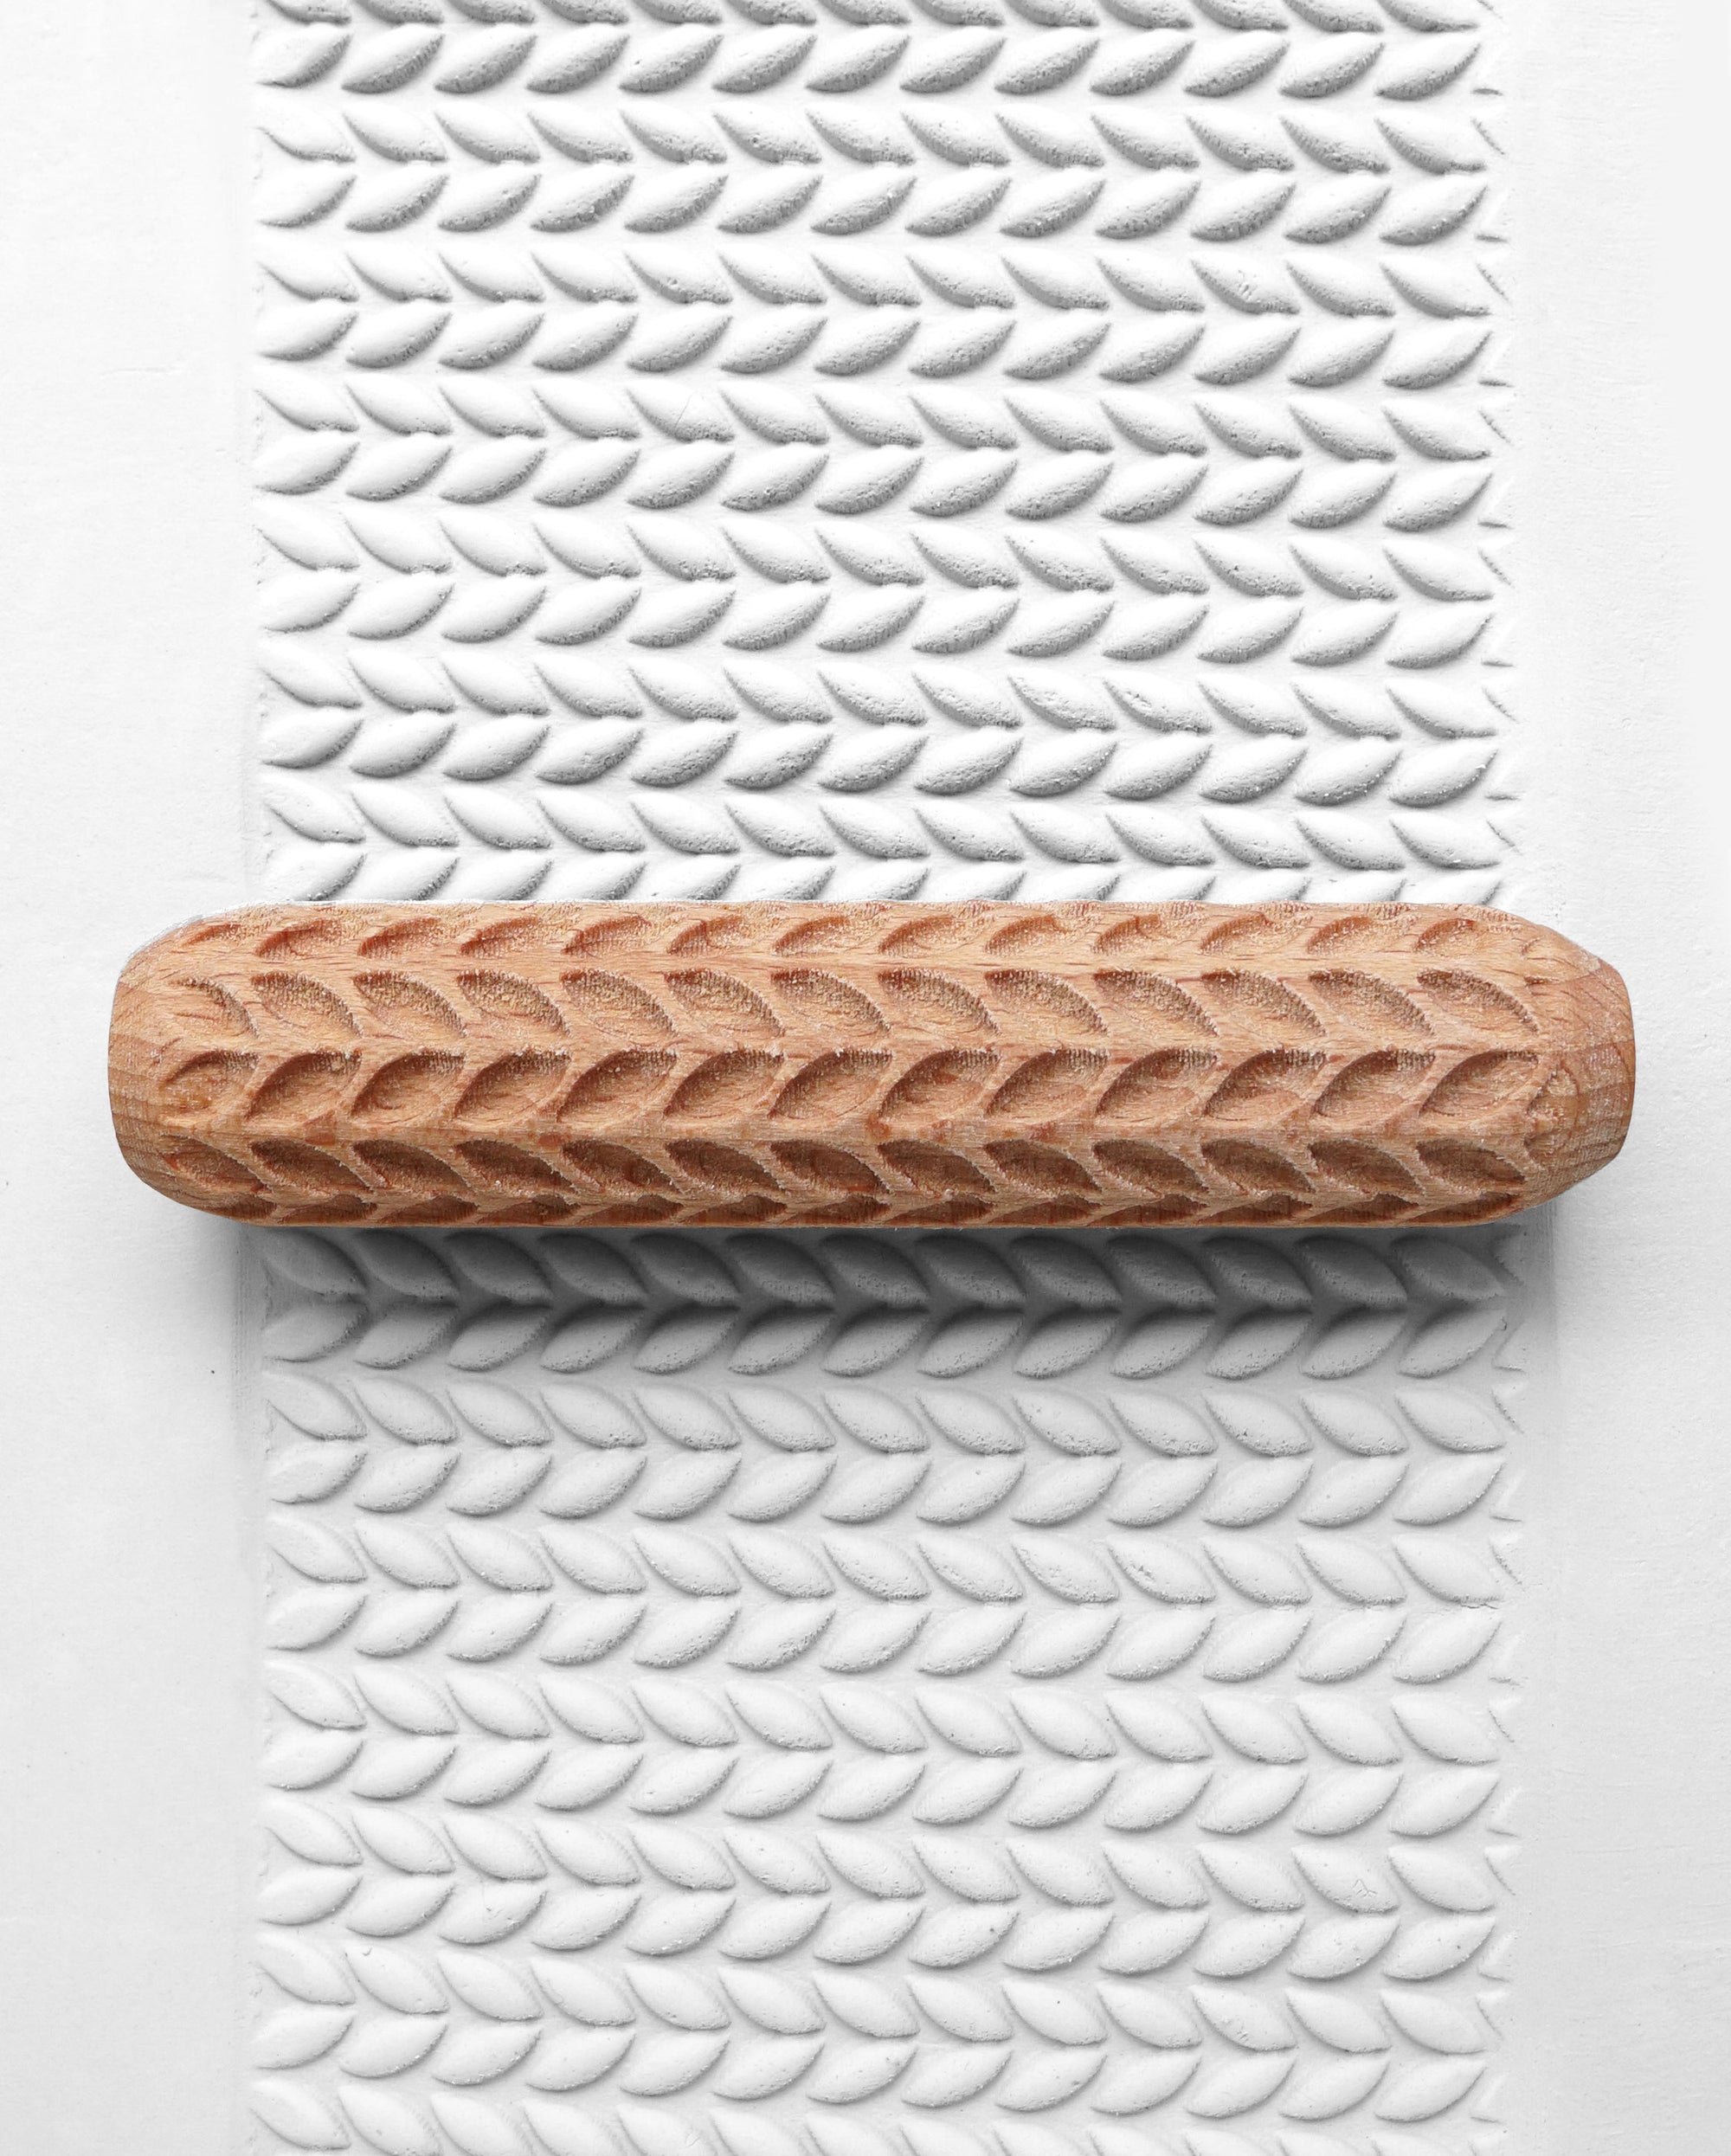 Clay Texture Roller, Clay Hand Roller - Ivy Trails - Sanbao Studio -  ChinaClayArt